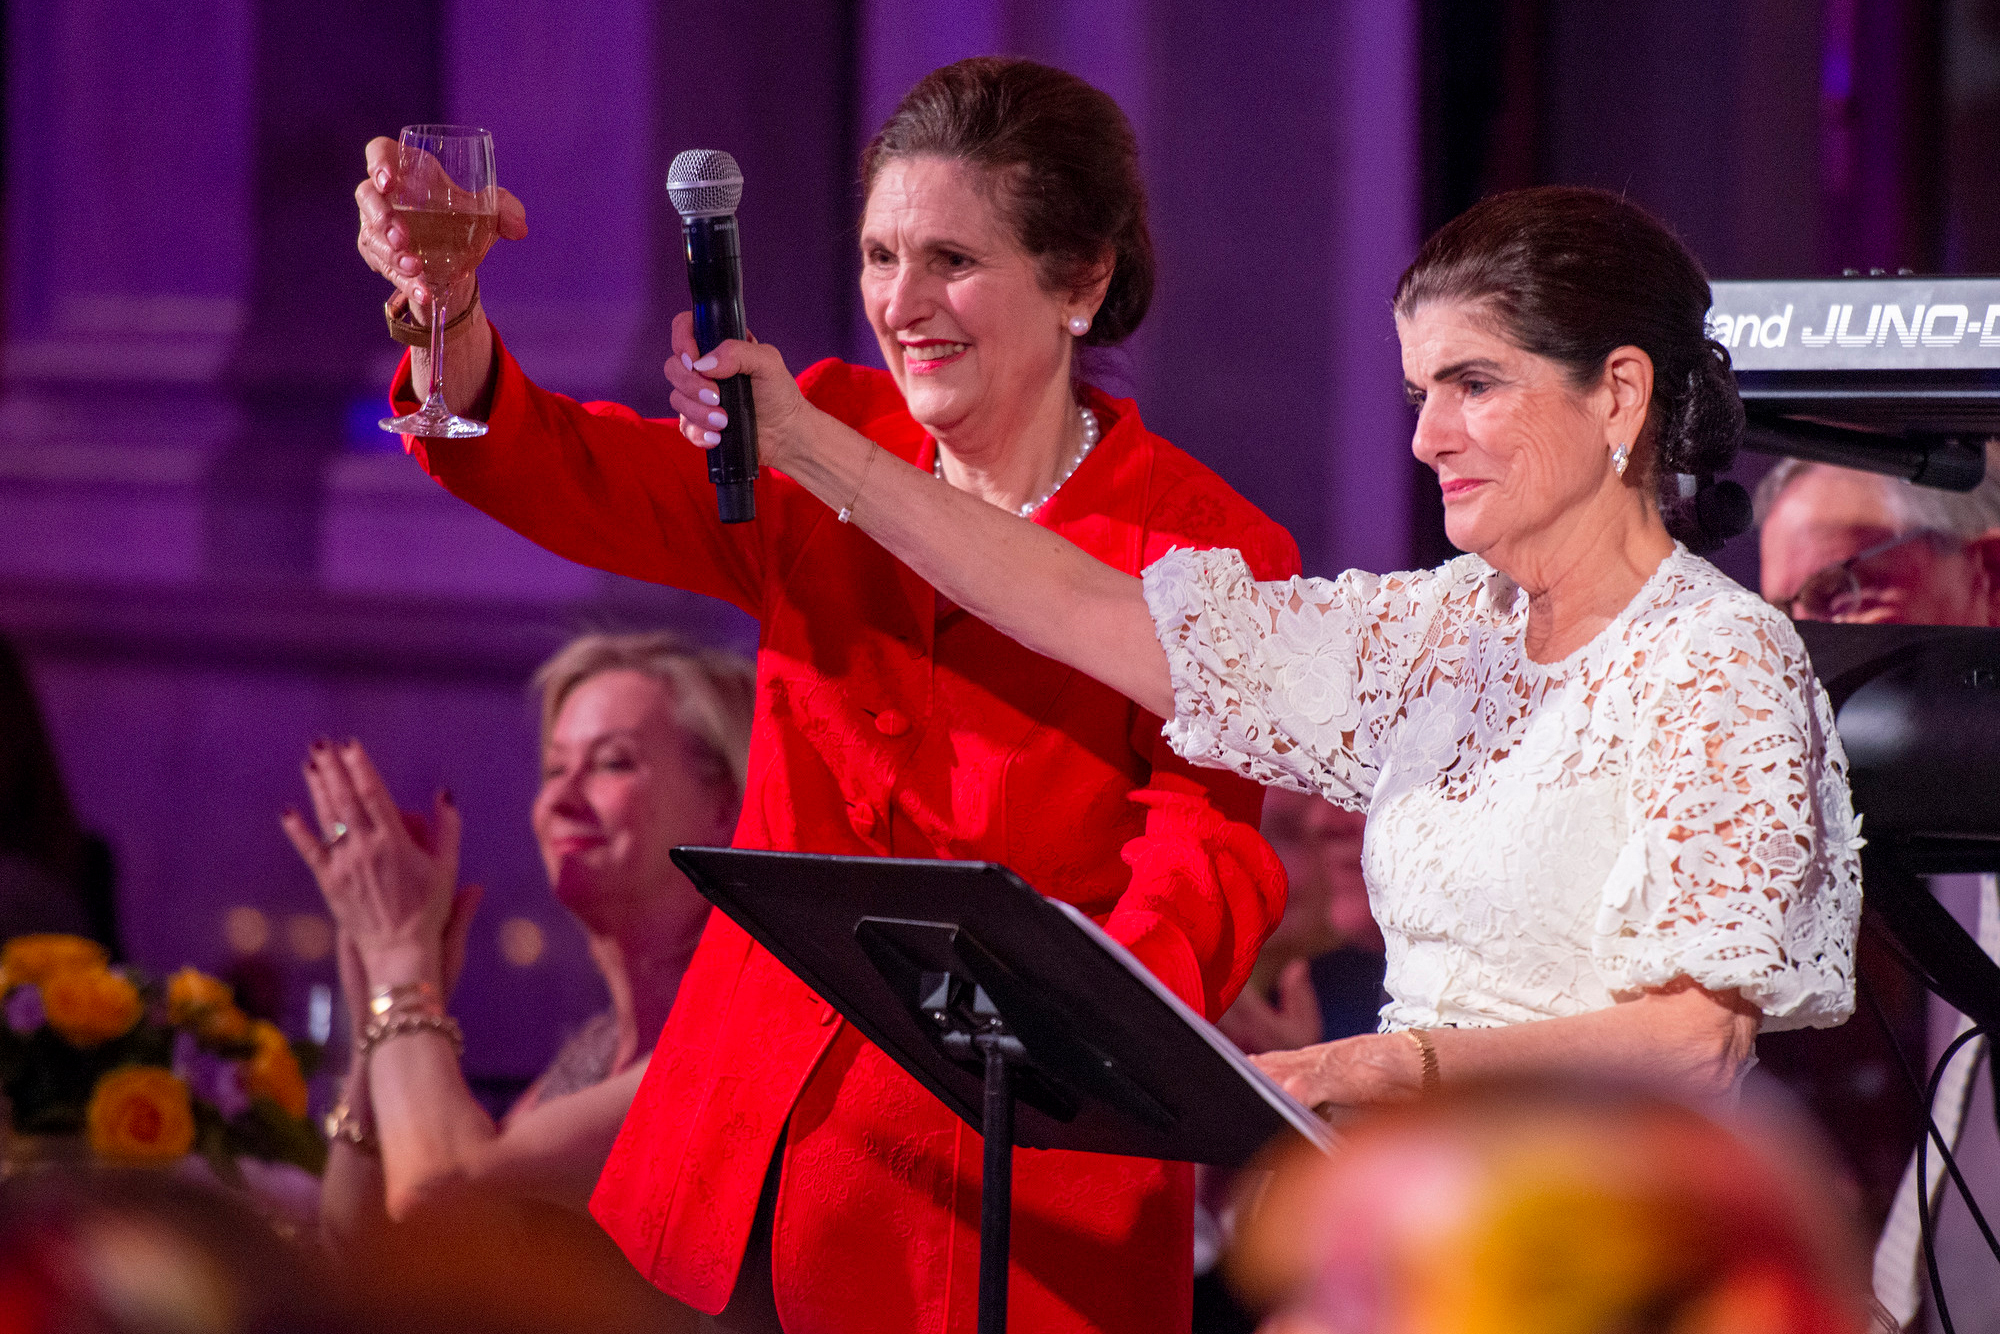 President Lyndon Baines Johnson’s daughters Lynda Johnson Robb, left, and Luci Baines Johnson toast U.S. Supreme Court Justice Ruth Bader Ginsburg. LBJ Foundation photo by Jay Godwin.